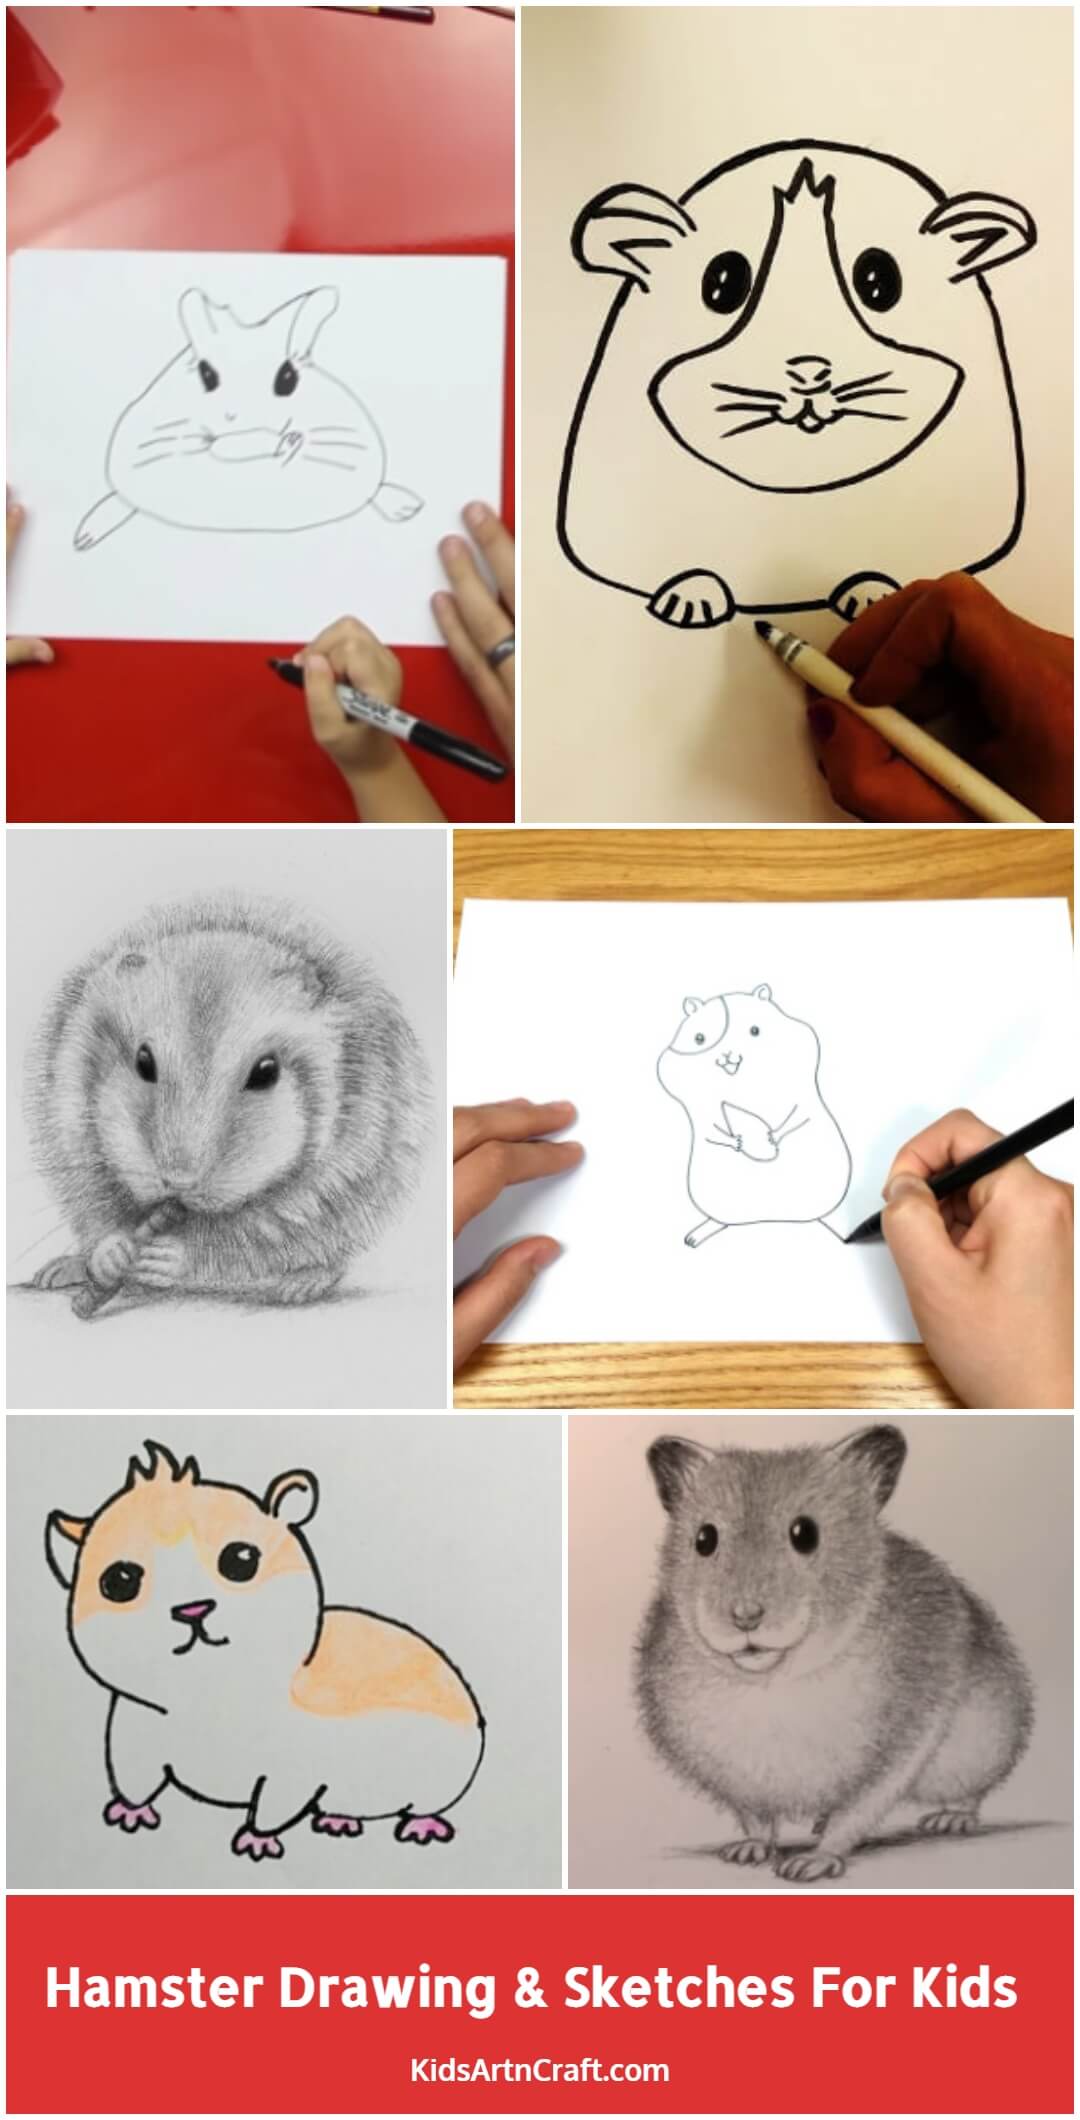 Hamster Drawing & Sketches For Kids